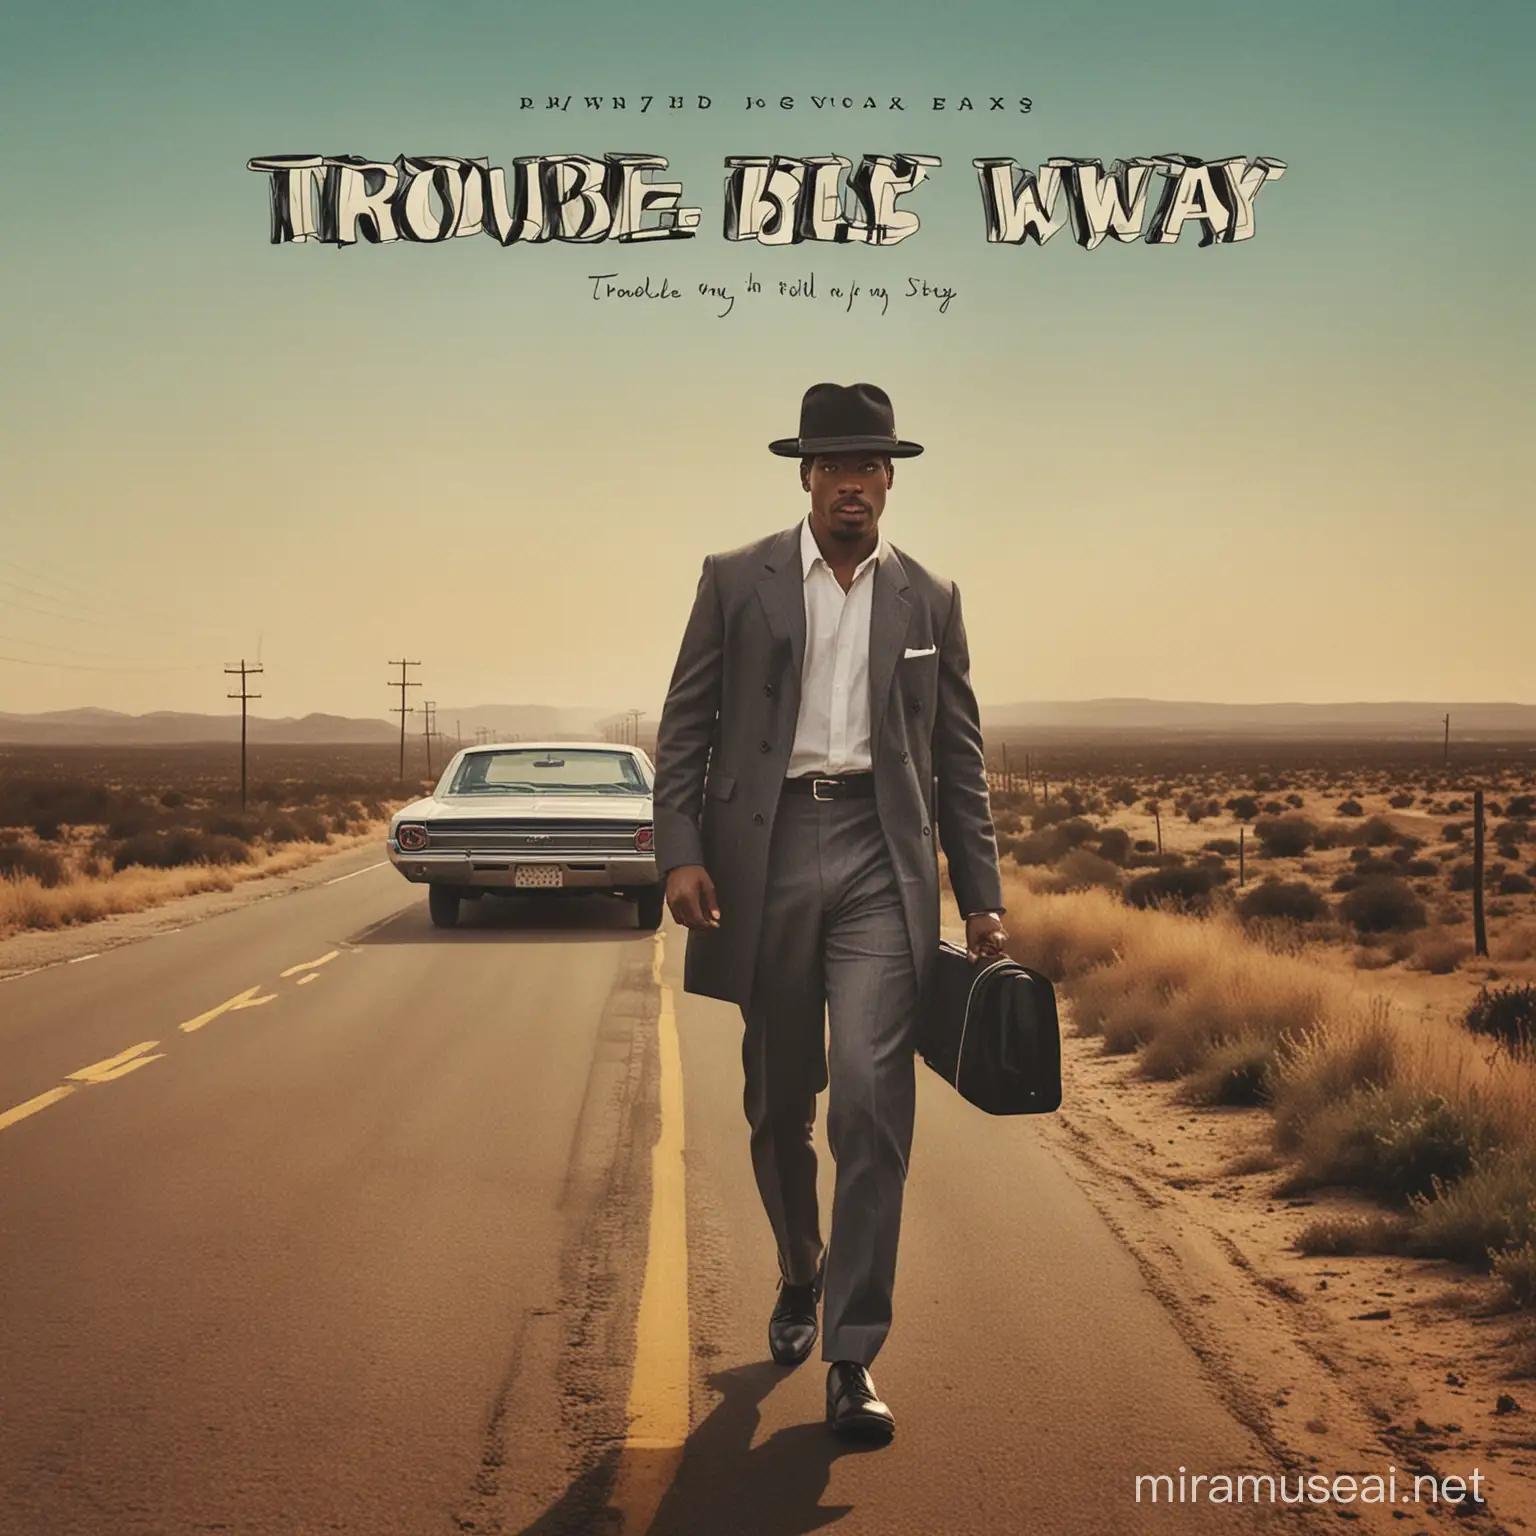 The Album cover for "Trouble In My Way" A underdog story one who just couldnt get it right but who had it all the whole time. .
